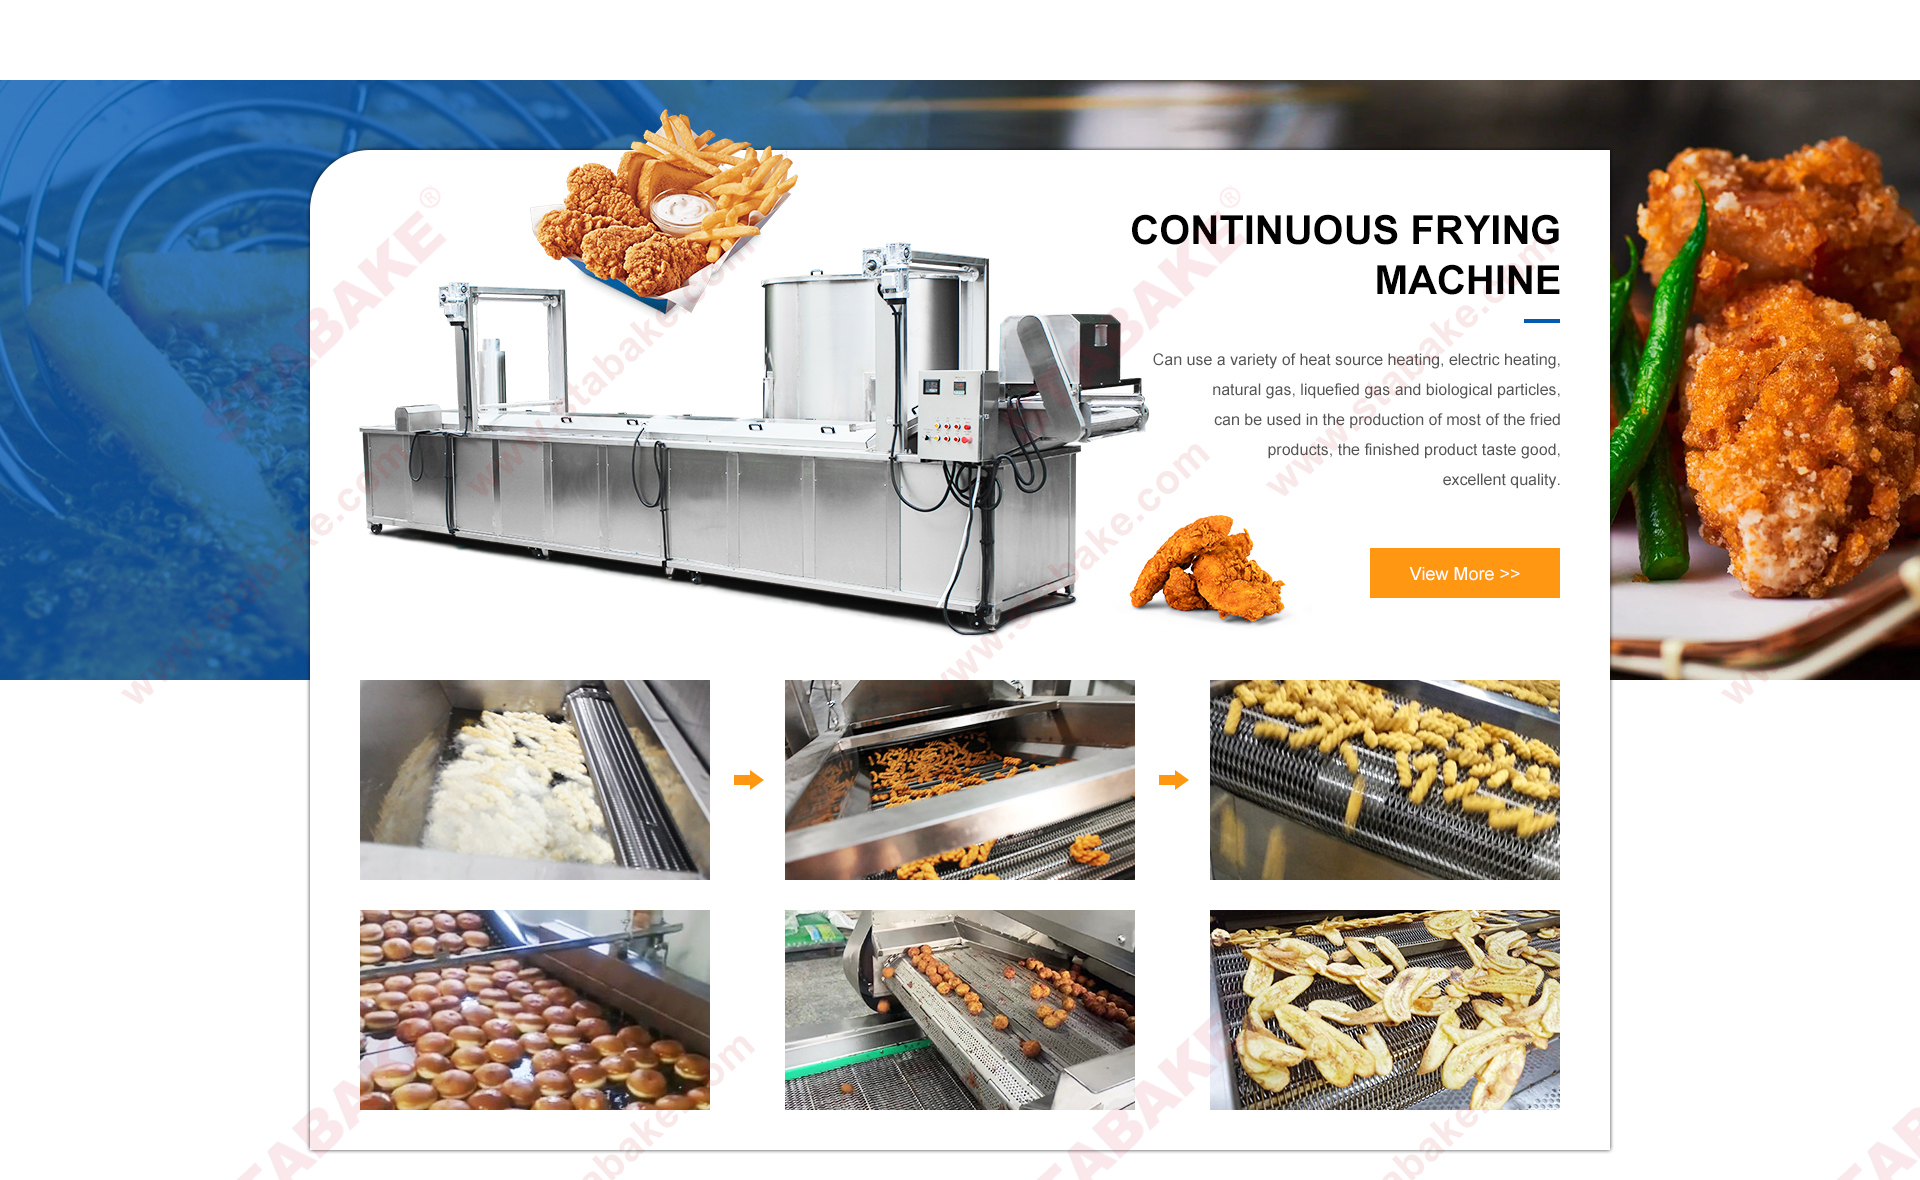 automatic continuous frying machine副本